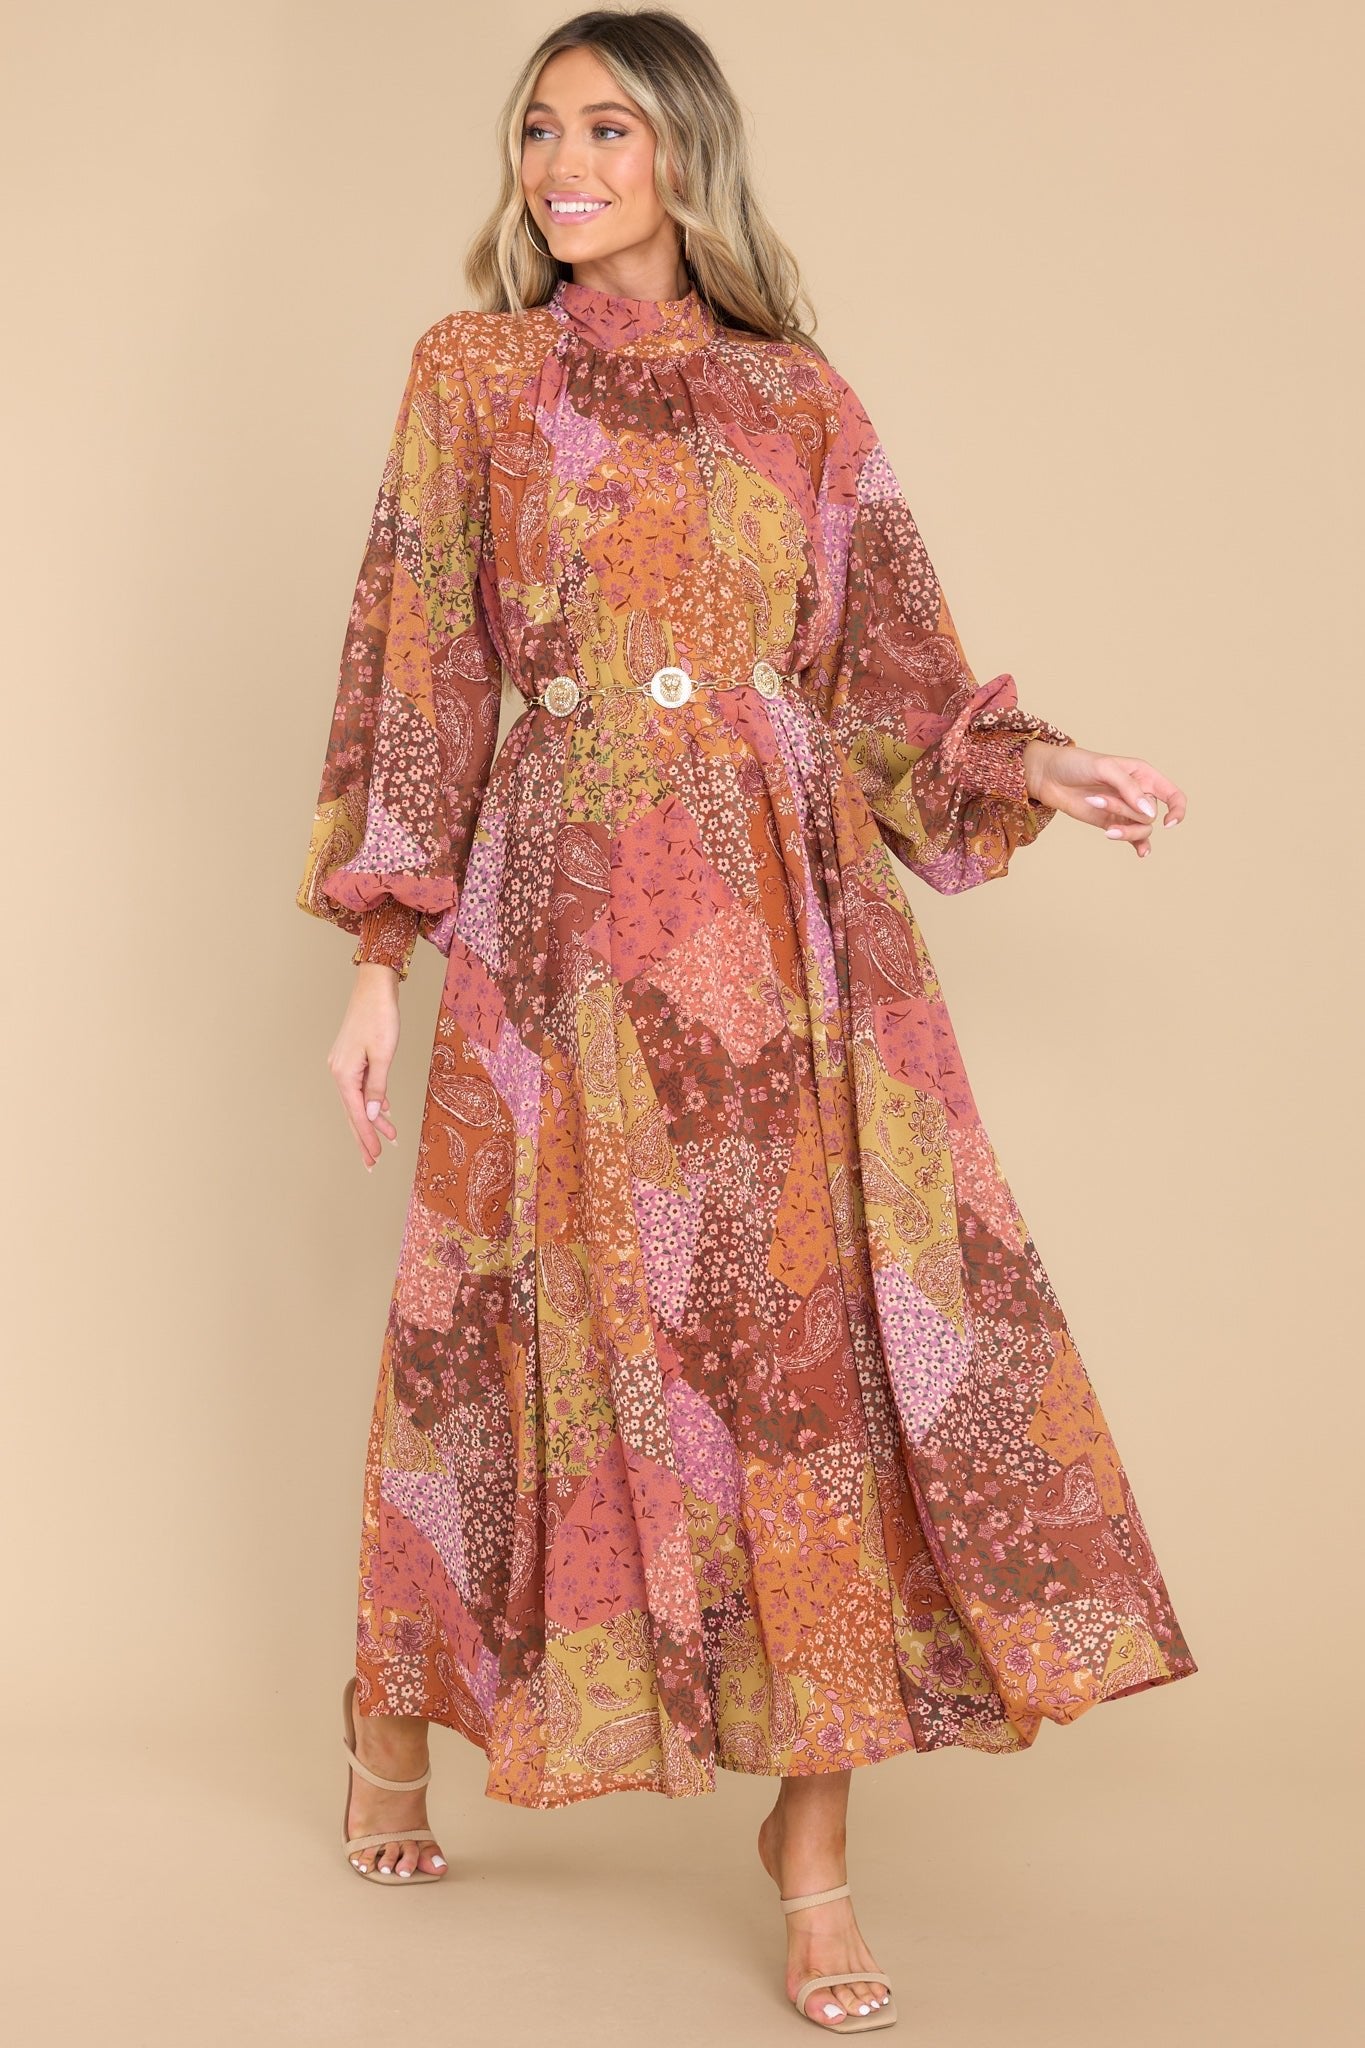 This rust colored multi print dress features a high neckline with long-sleeves, and a self tie behind the neck.